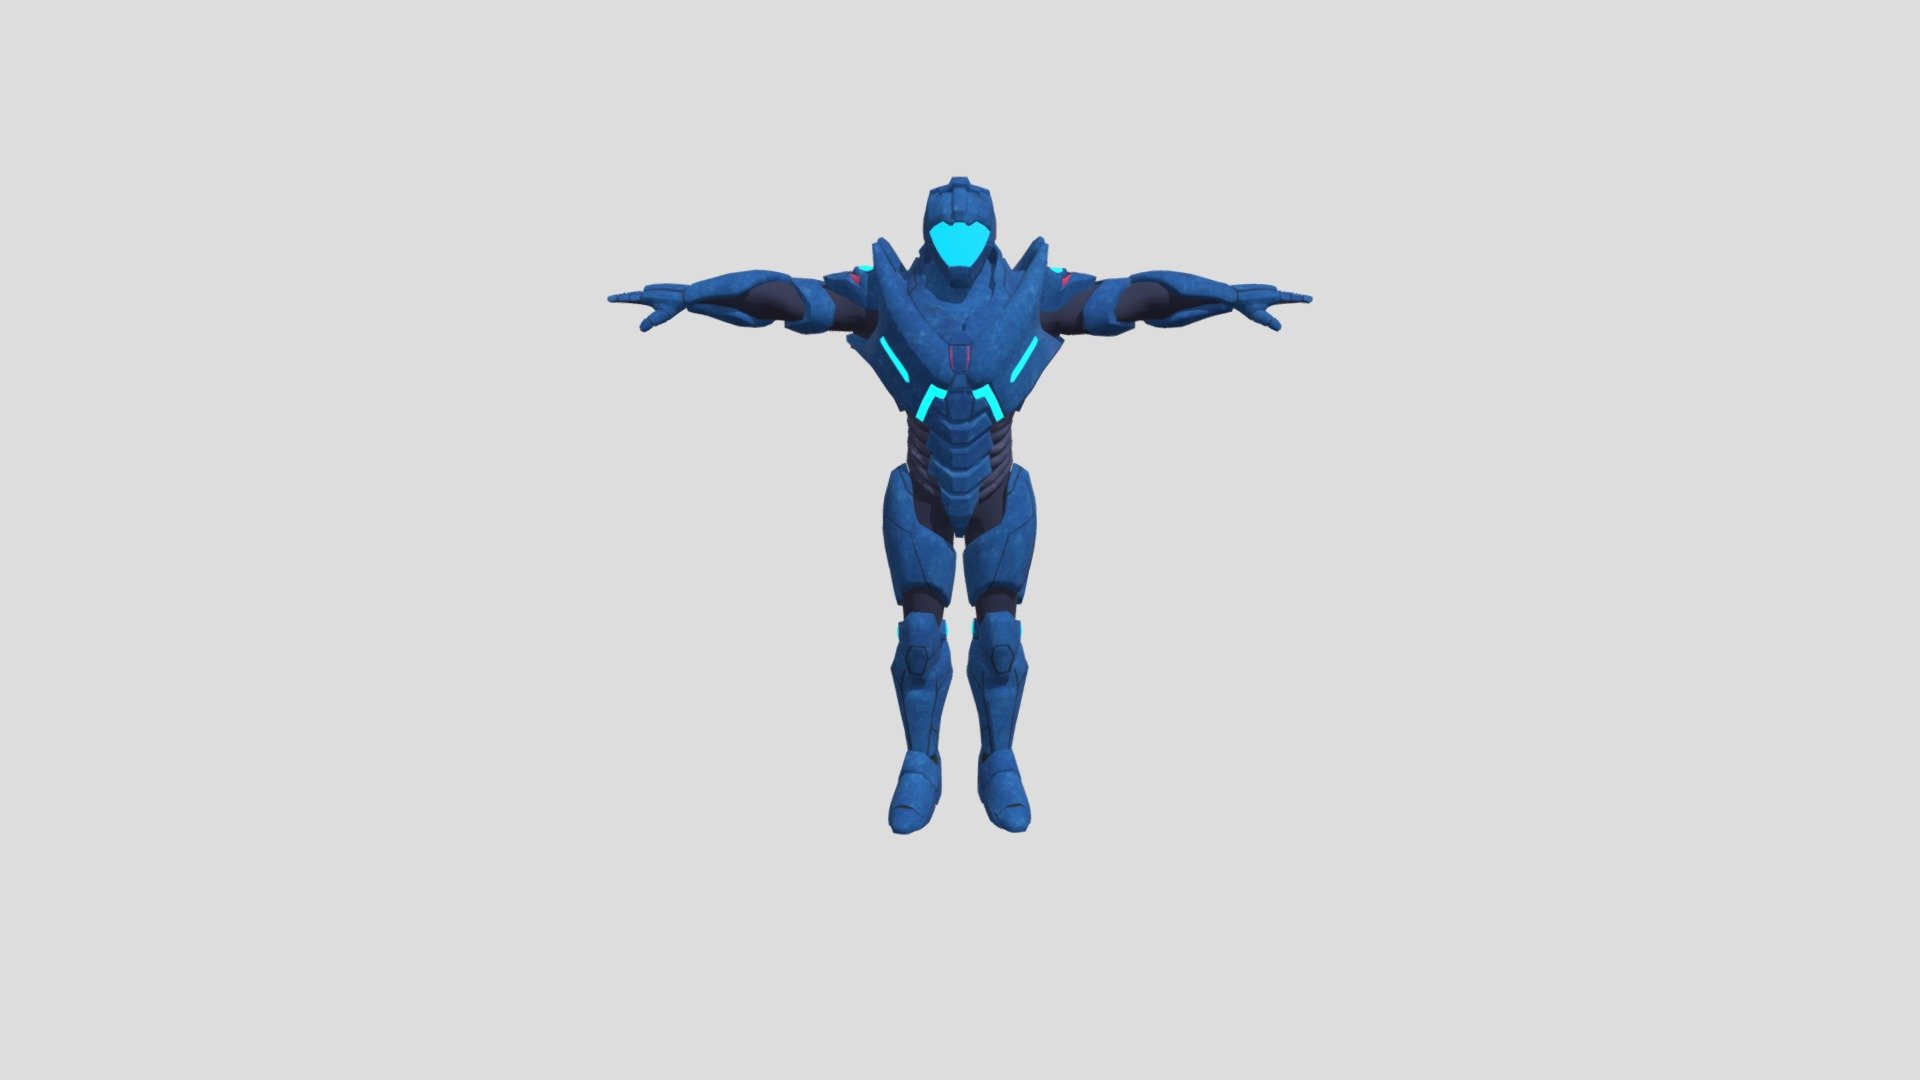 The &ldquo;Blue Armor Suit Neon Cyberpunk Rigged Character